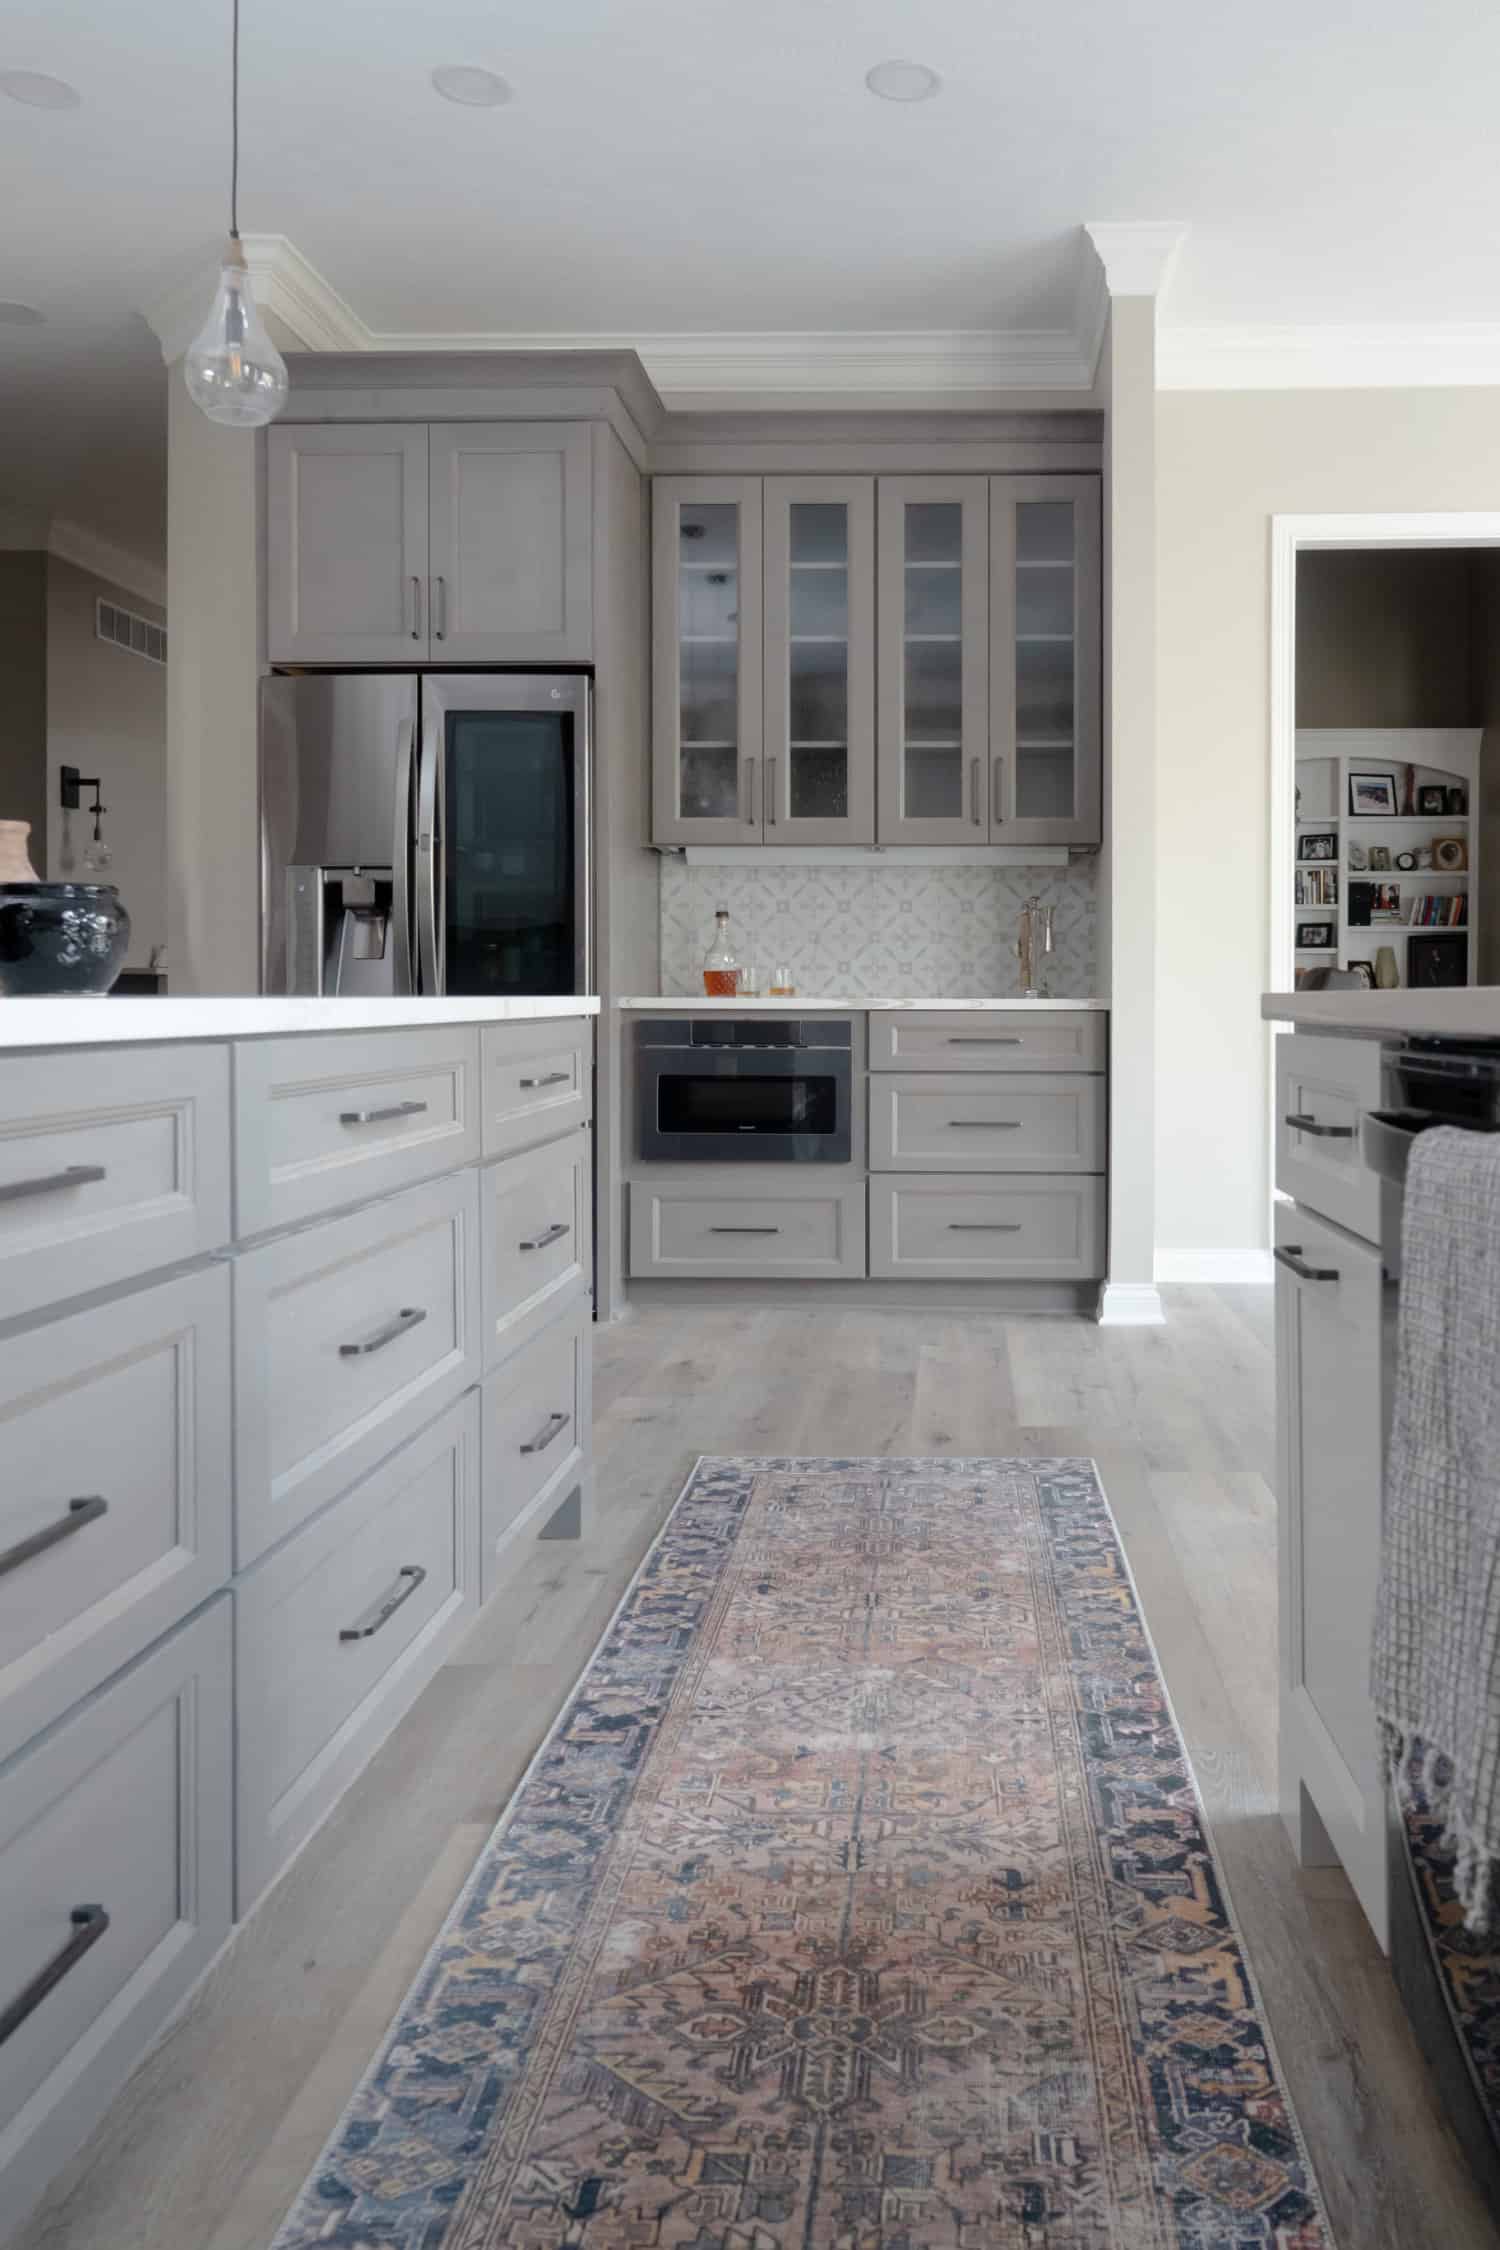 Nicholas Design Build | A kitchen remodel with gray cabinets and a rug on the floor.